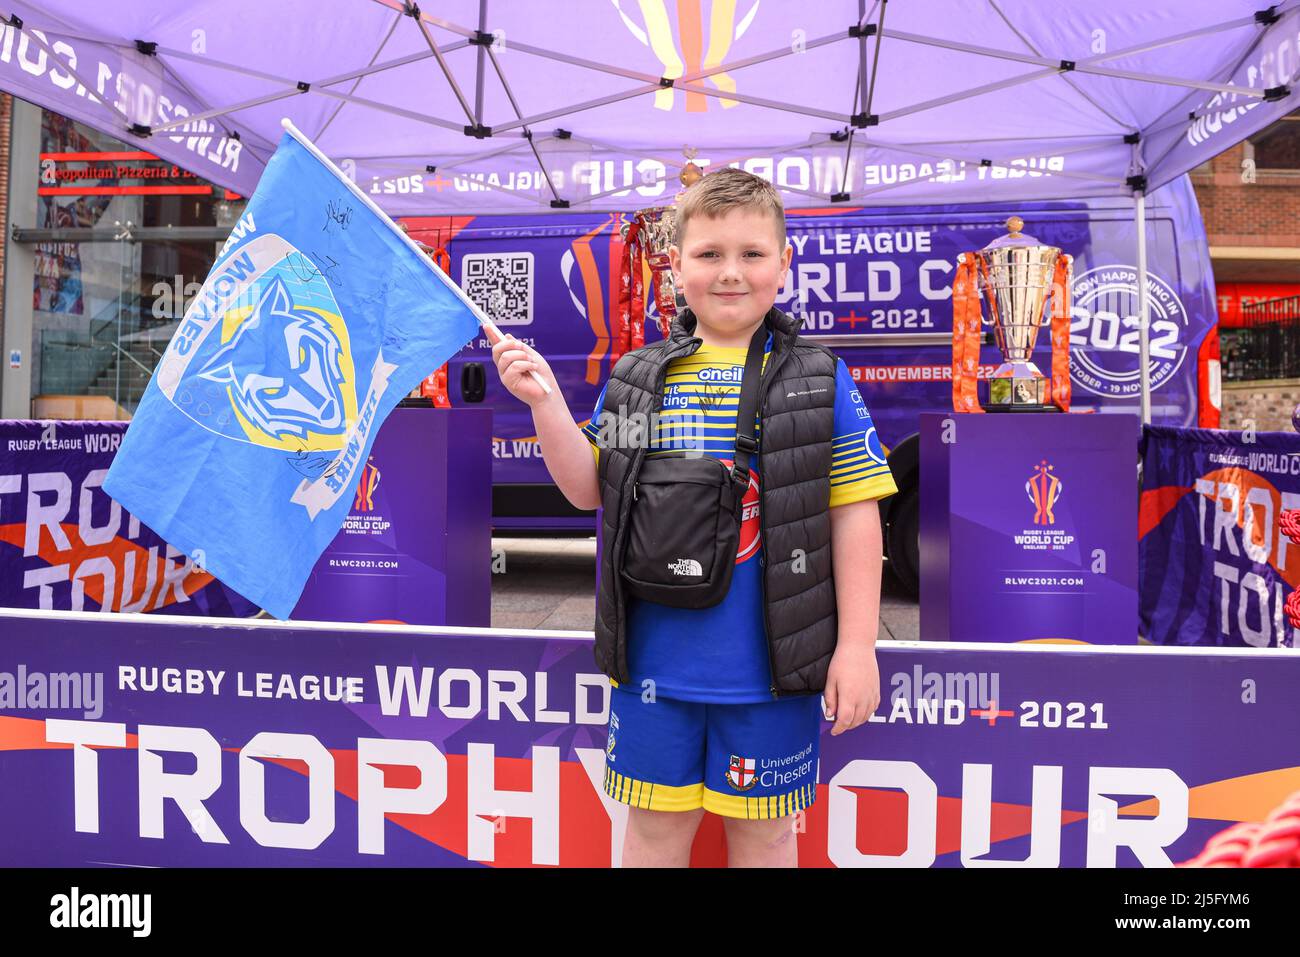 Warrington, UK. 23rd Apr, 2022. A young Warrington Wolves fan poses for photos next to the Rugby League World Cup Trophies in the fan zone before the game in Warrington, United Kingdom on 4/23/2022. (Photo by Simon Whitehead/News Images/Sipa USA) Credit: Sipa USA/Alamy Live News Stock Photo